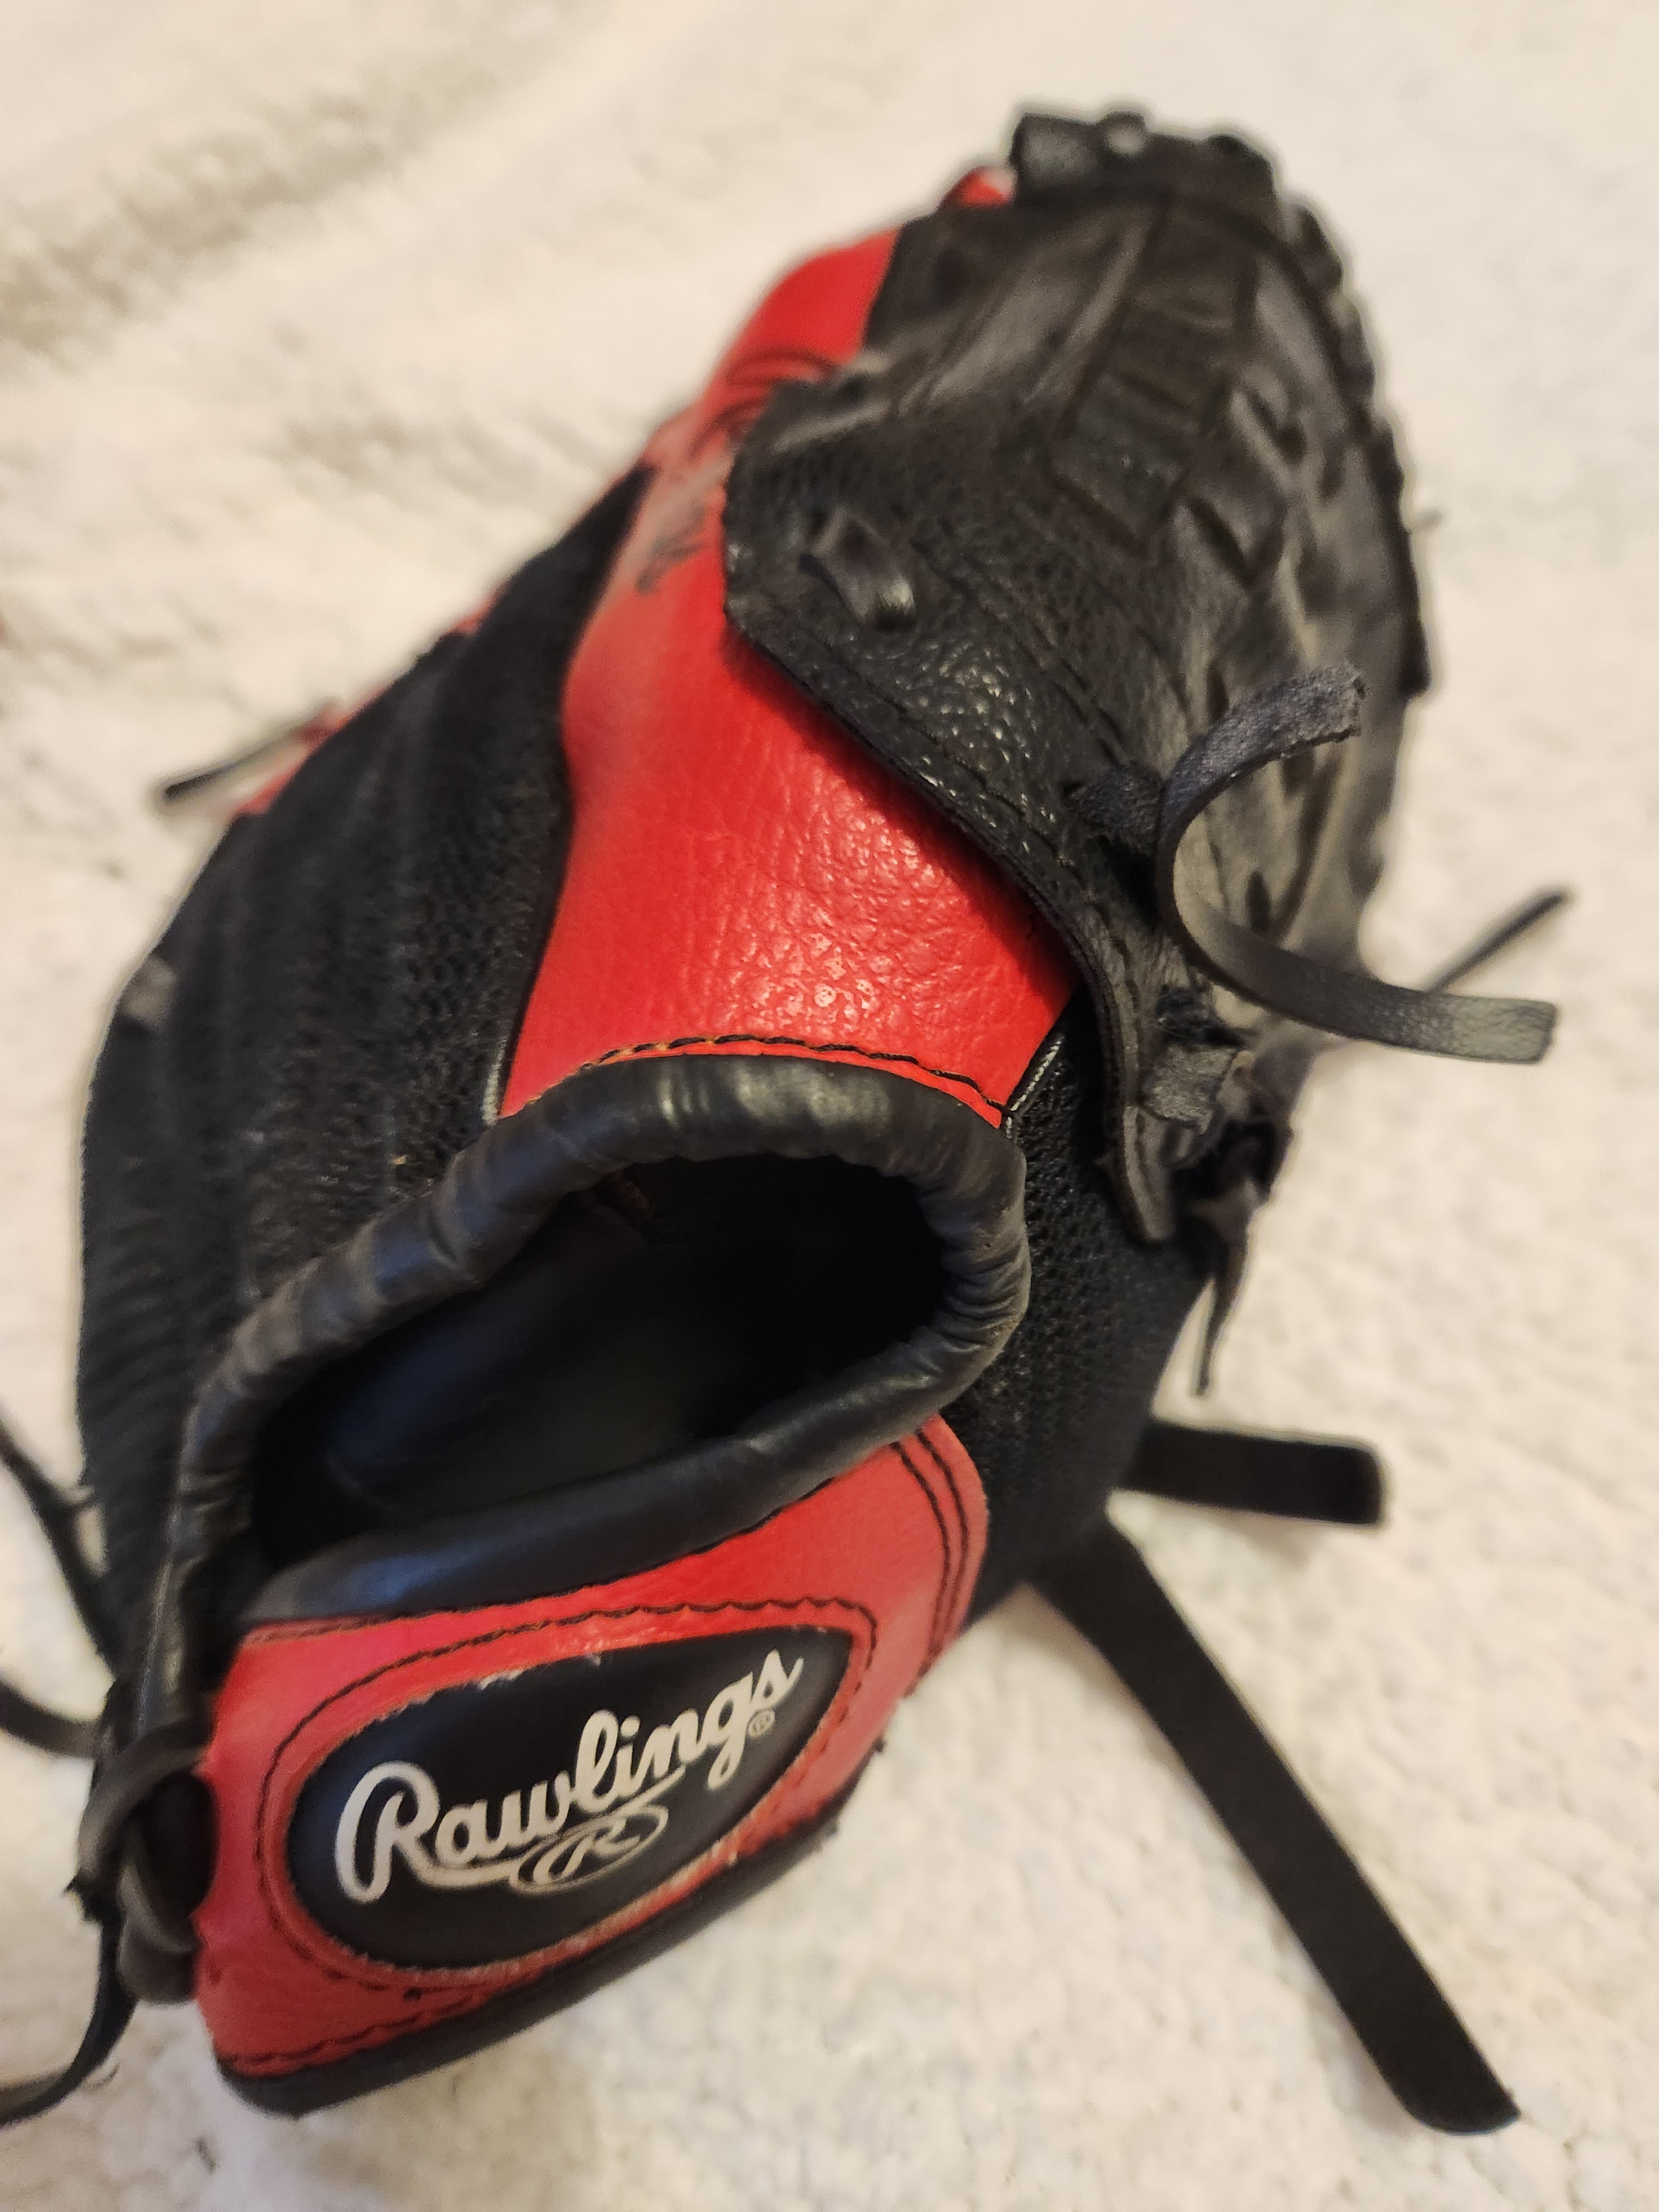 Rawlings Sure Catch Mike Trout Baseball Glove Throw